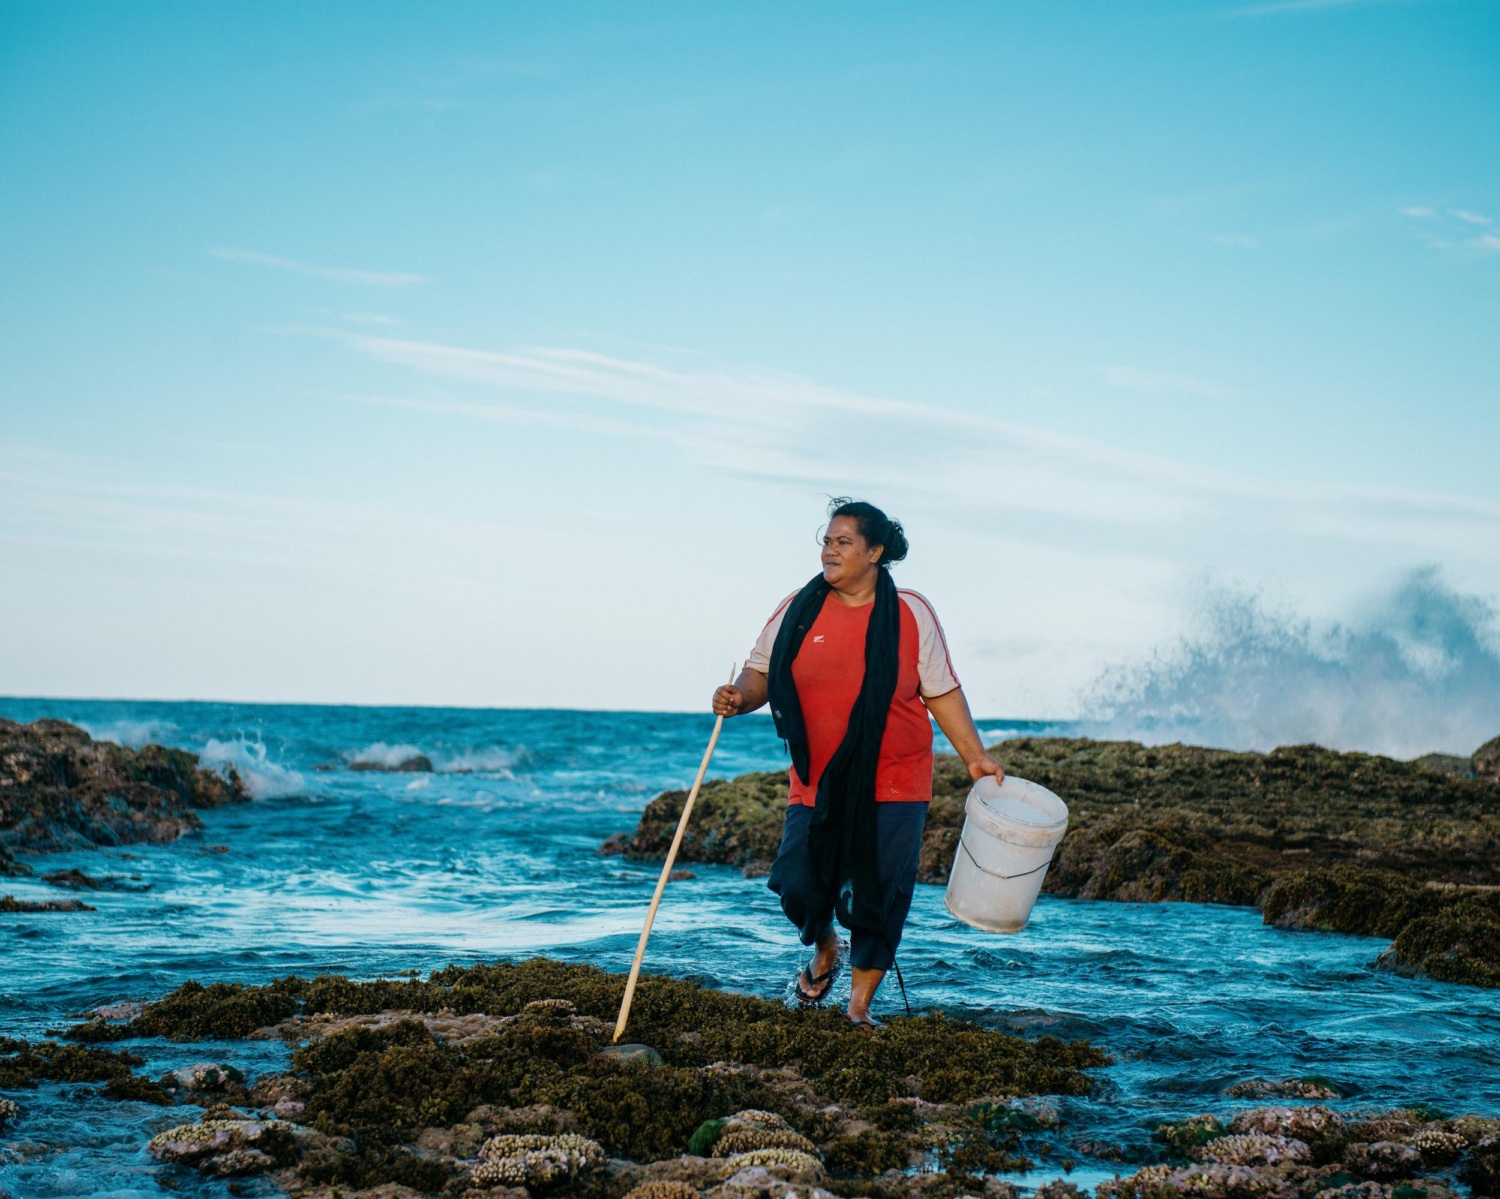 Woman harvesting seafood on a reef close to the shore in Tonga on the island of Tongatapu.